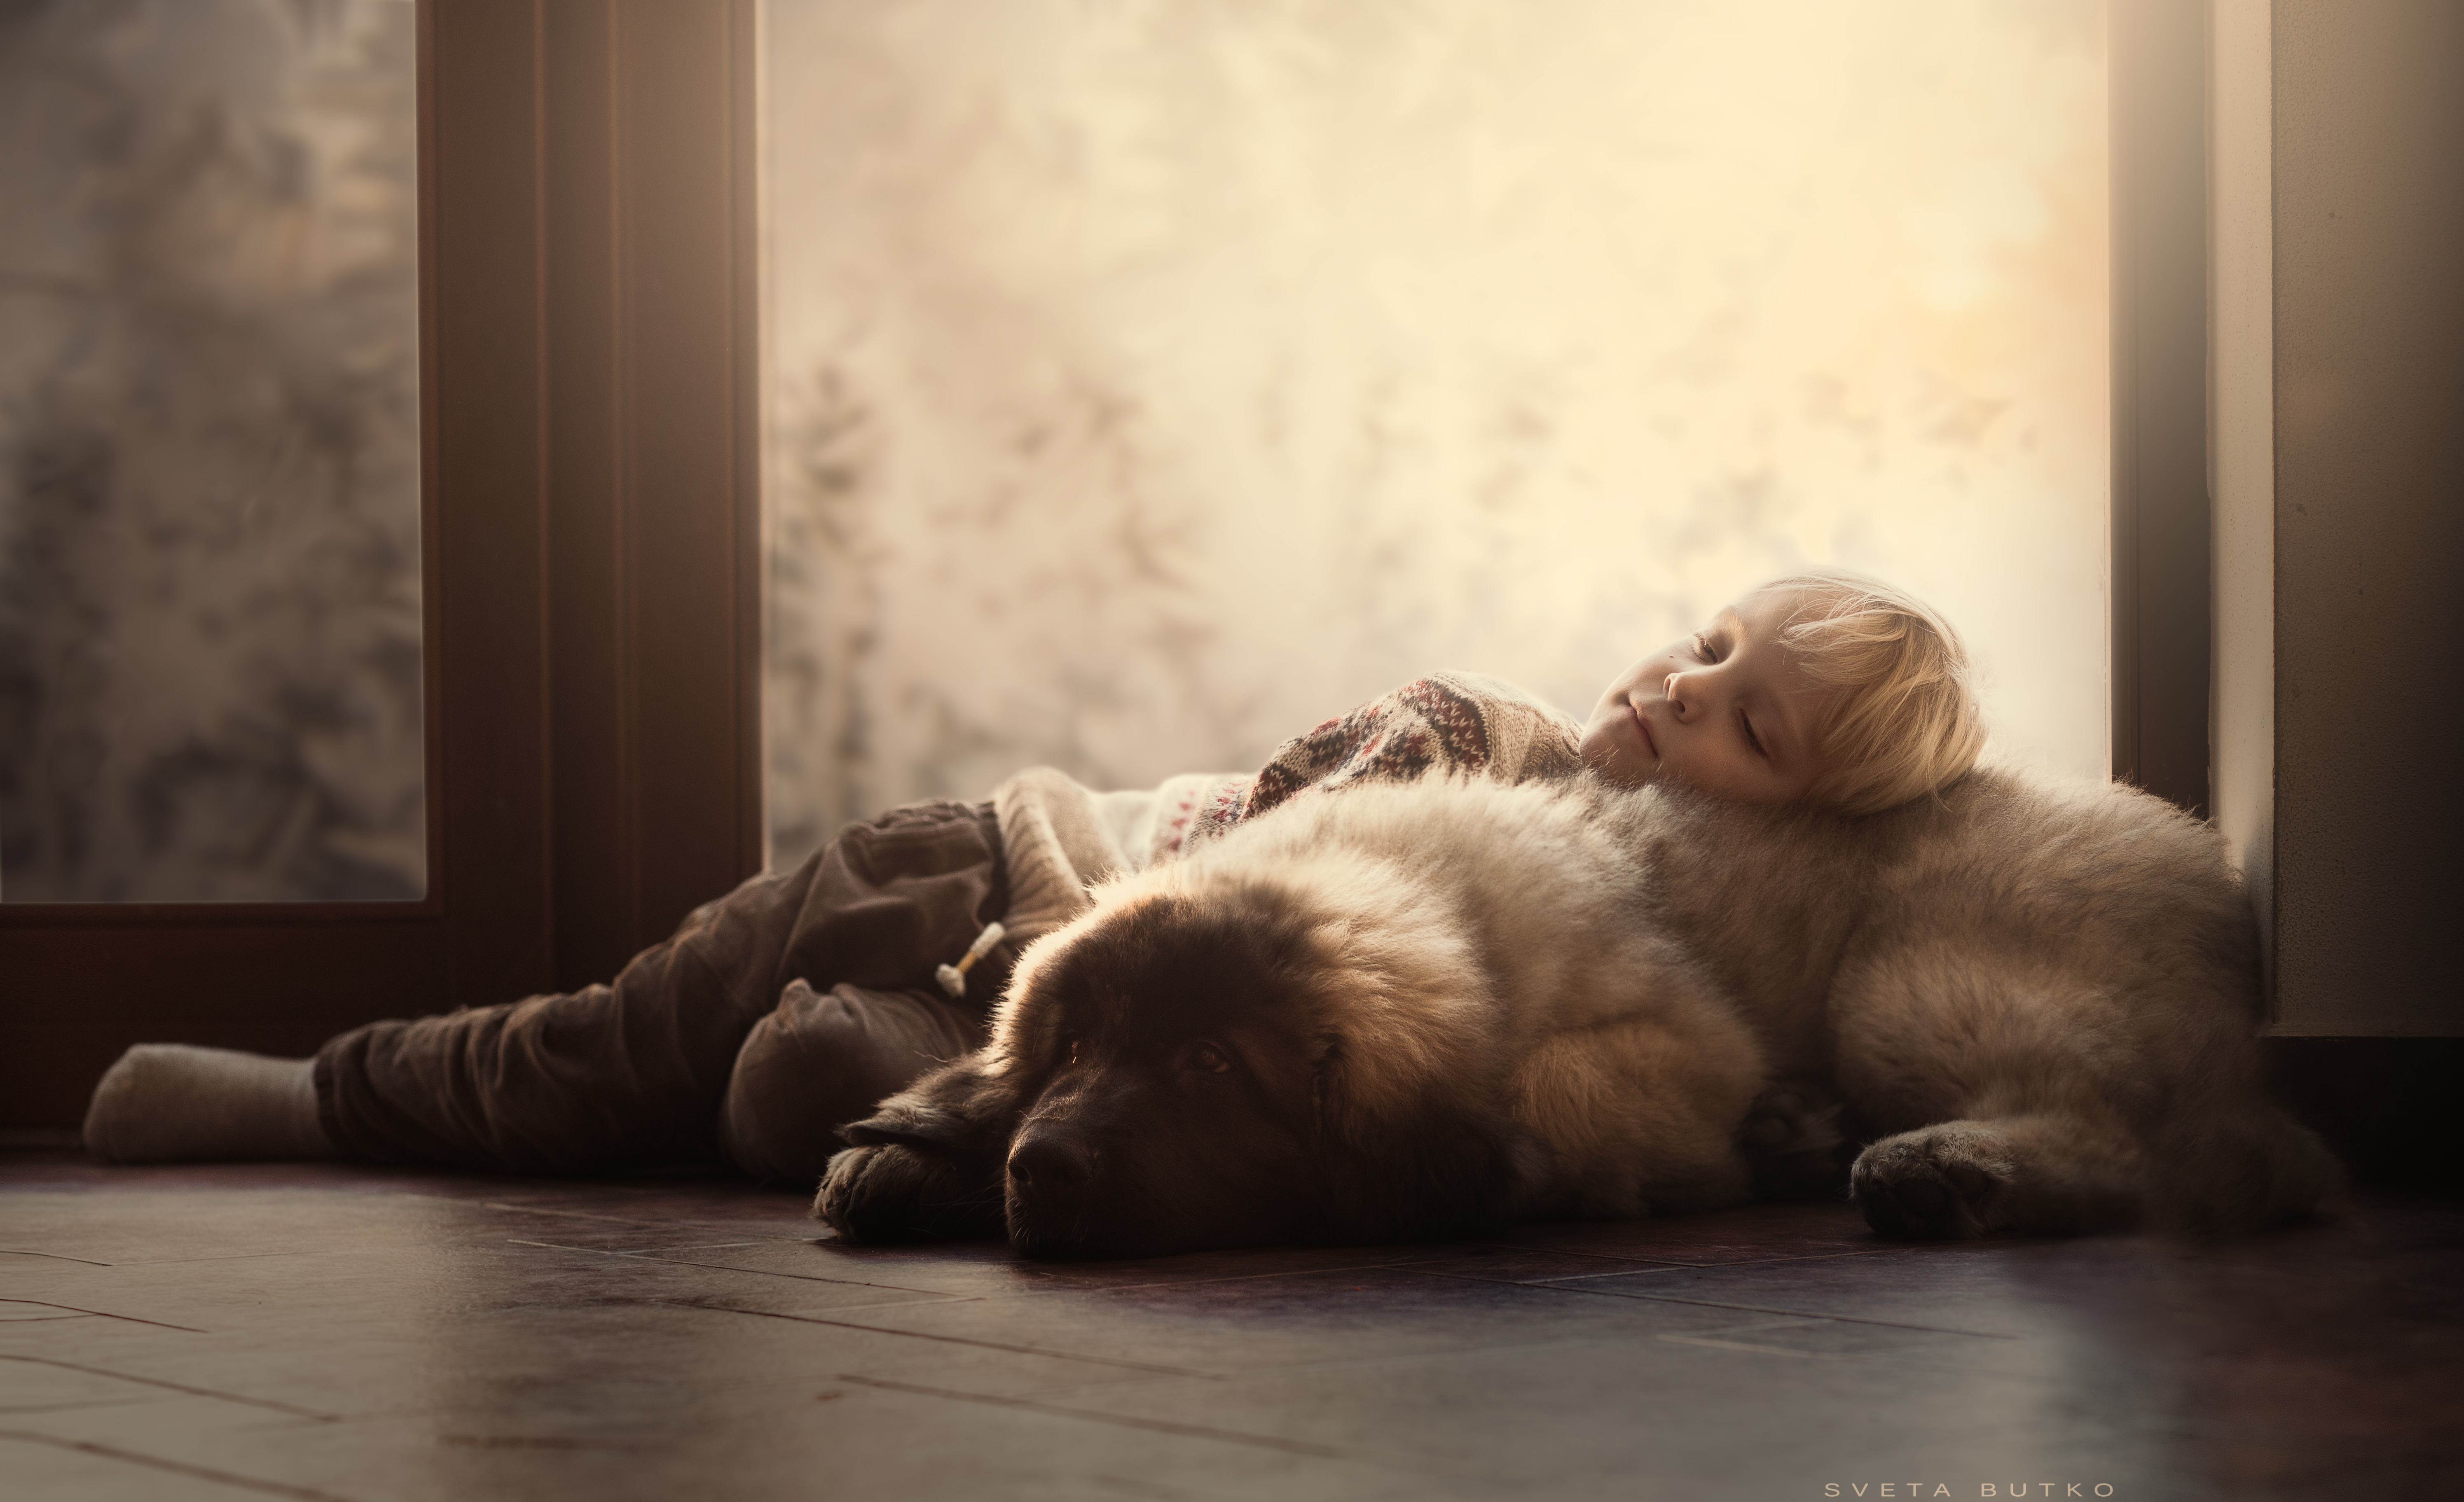 Wallpaper, blondhair, boy, calm, child, childhood, children, cosy, cute, dawn, dog, dogs, dreaming, dusk, eyesclosed, floor, furry, indoors, Inside, laying, little, lyingdown, oneperson, patterned, peaceful, pet, relaxing, resting, room, serene, sleeping